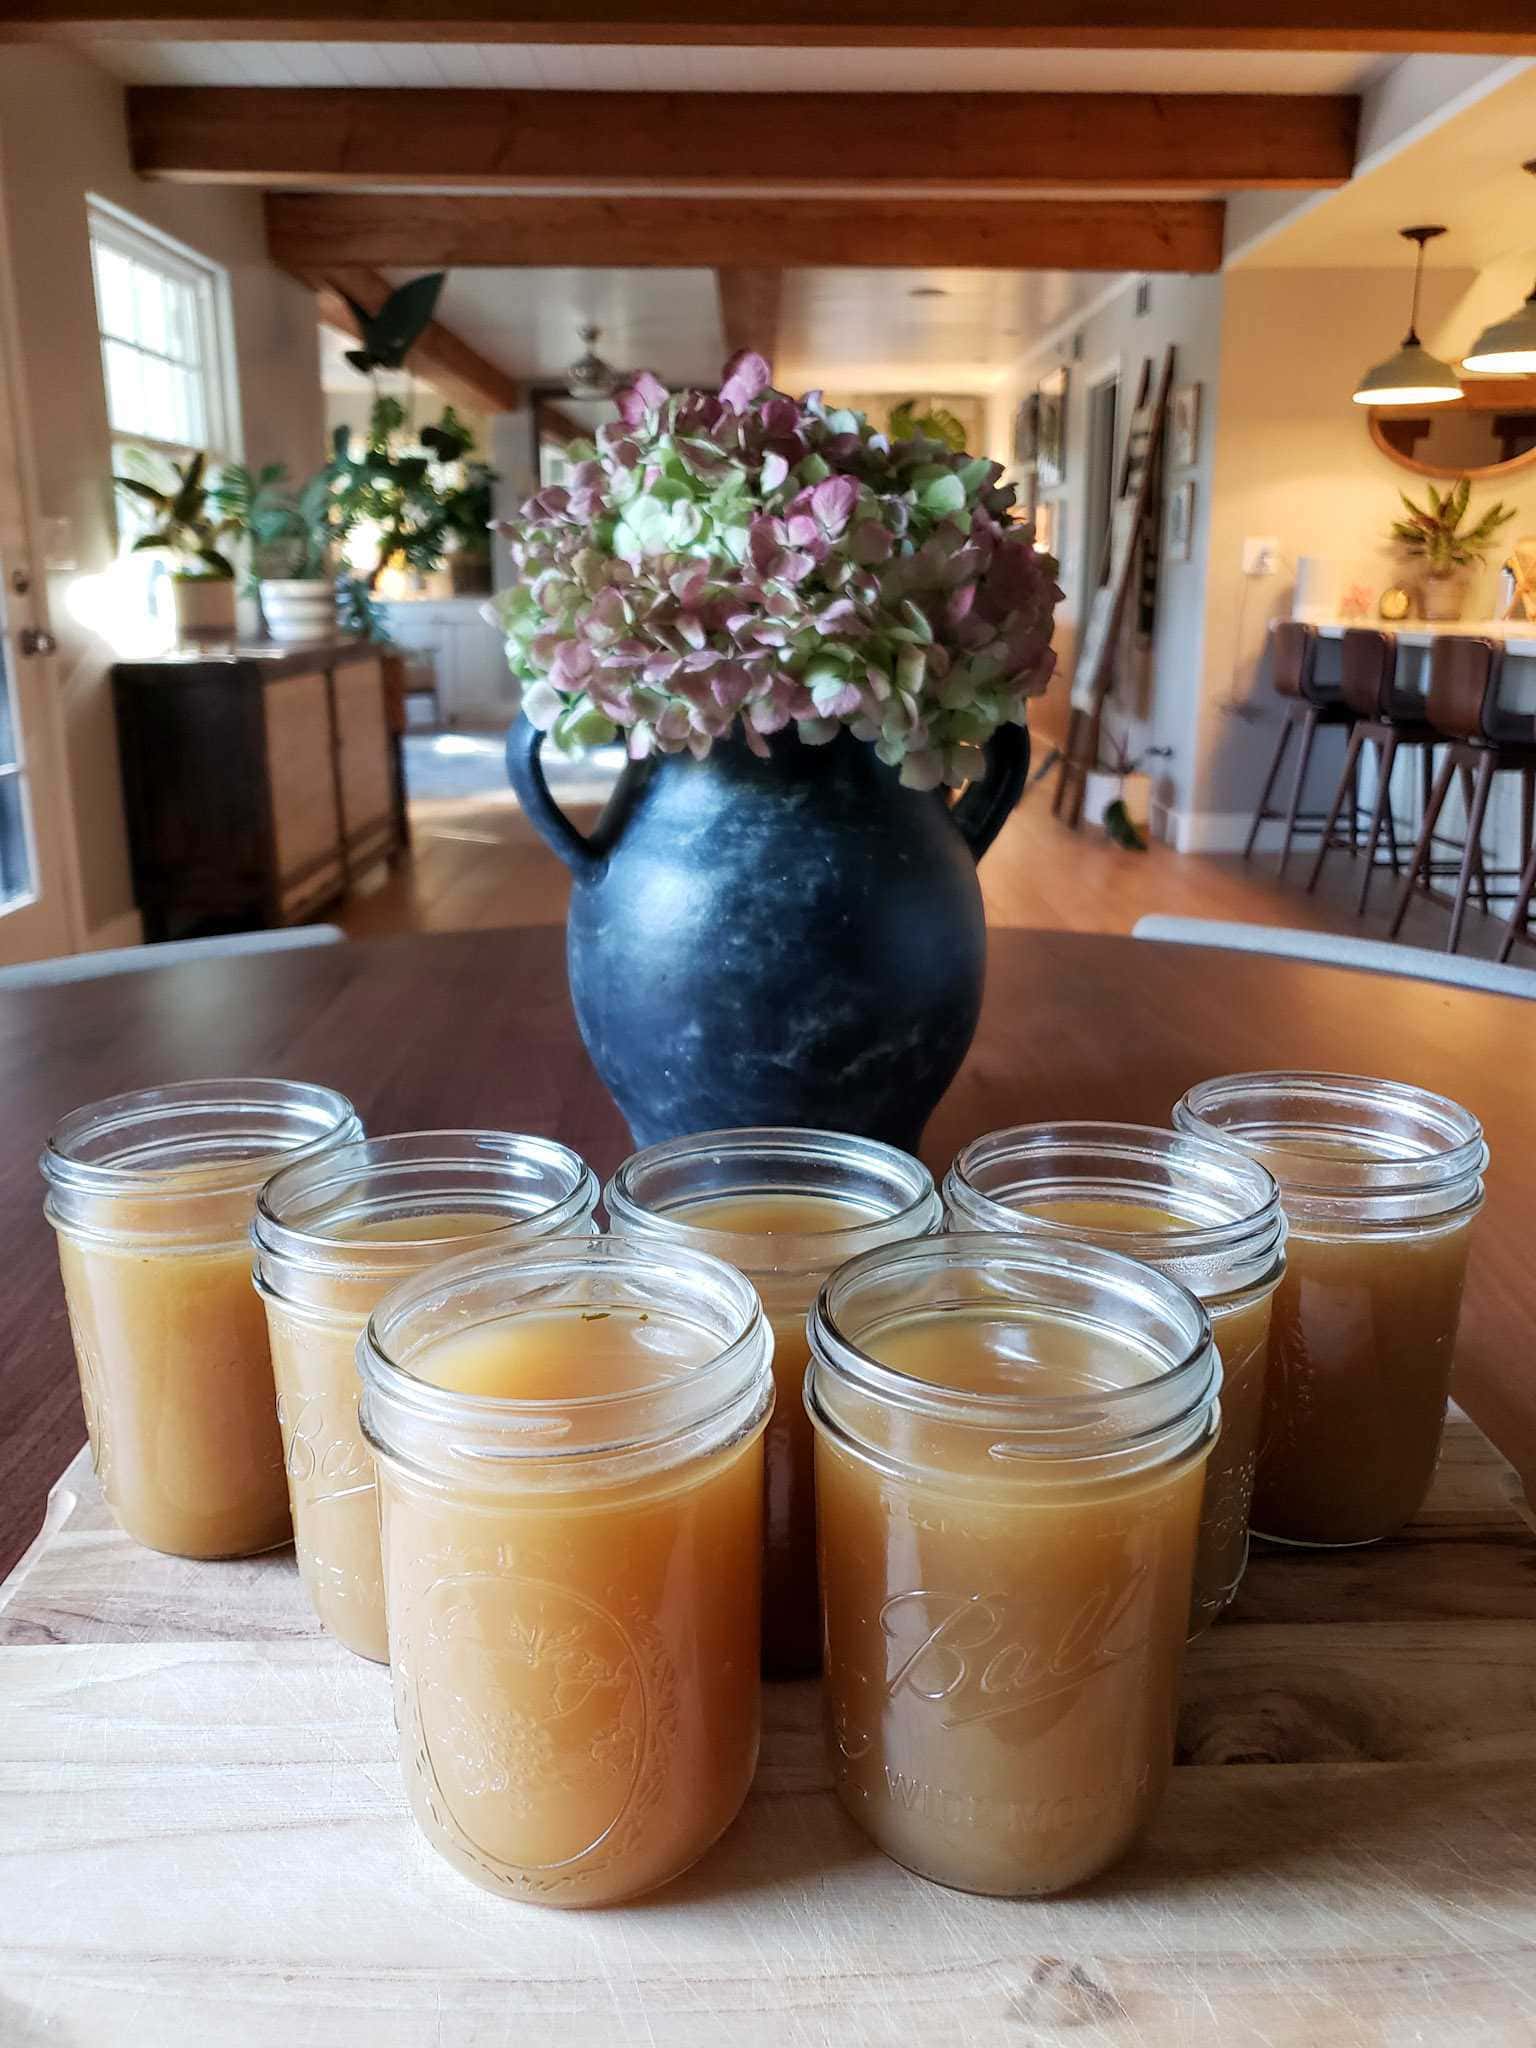 Seven pint jars of vegetable broth lined up like bowing pins on a wooden cutting board. The liquid is light brown in color.